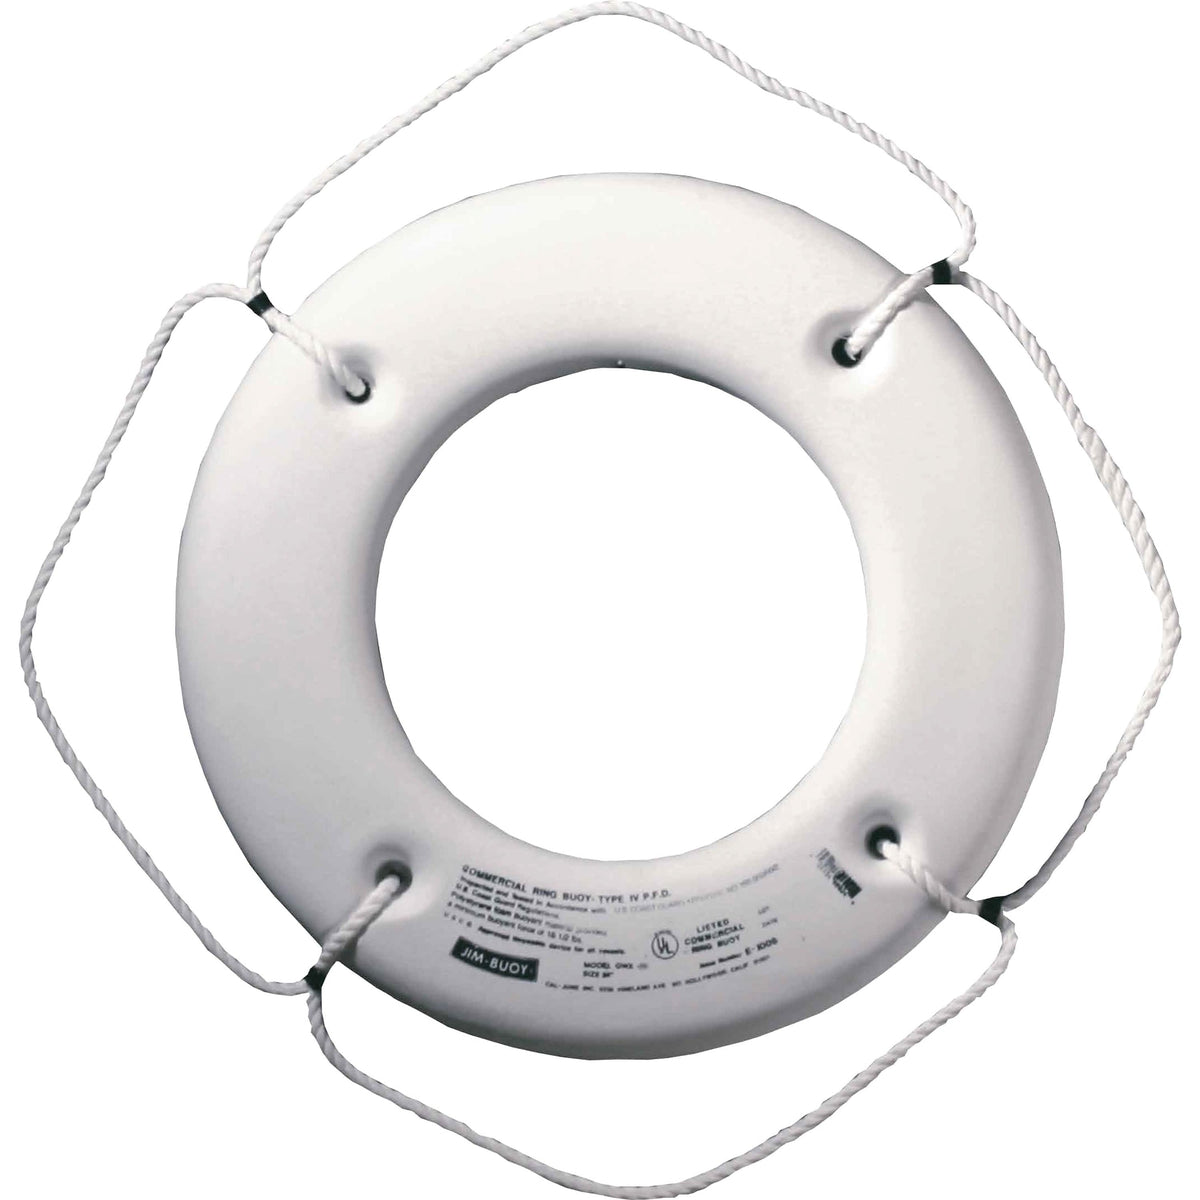 Cal-June USCG Approved Hard Shell Series Life Ring 20" White #HS-20 W